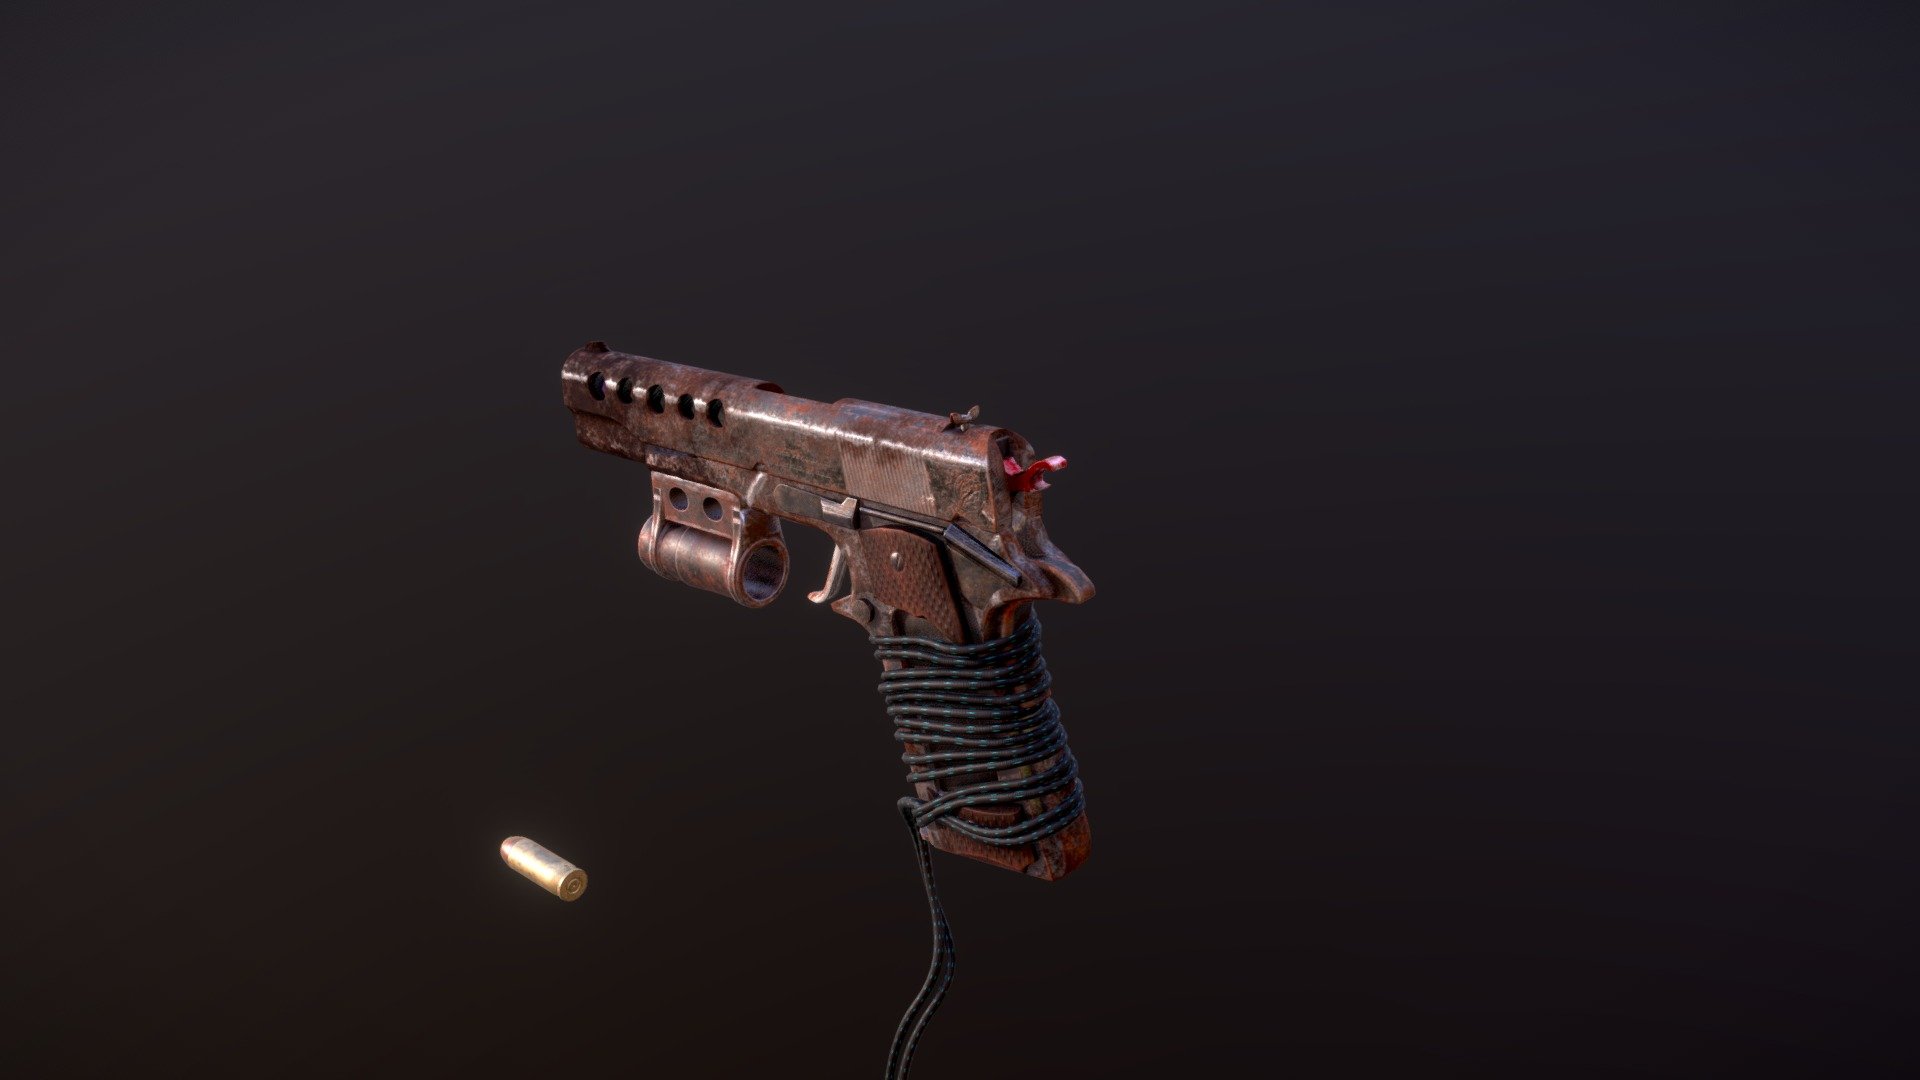 After a day of hunting radioactive mutant squirrels use this makeshift 1911 to open a cold brew. 

A completely game ready 1911 pistol model with rig. Textures are a mixture of 4k and 2k for the body and magazine. The bullets are 512 textures, and the lace is a tiled 256 texture.

-Modeled, UV'd, and rigged in Blender 
-high poly in ZBrush
-baking and texturing in Substance Painter - Makeshift 1911 - Download Free 3D model by csheffield 3d model